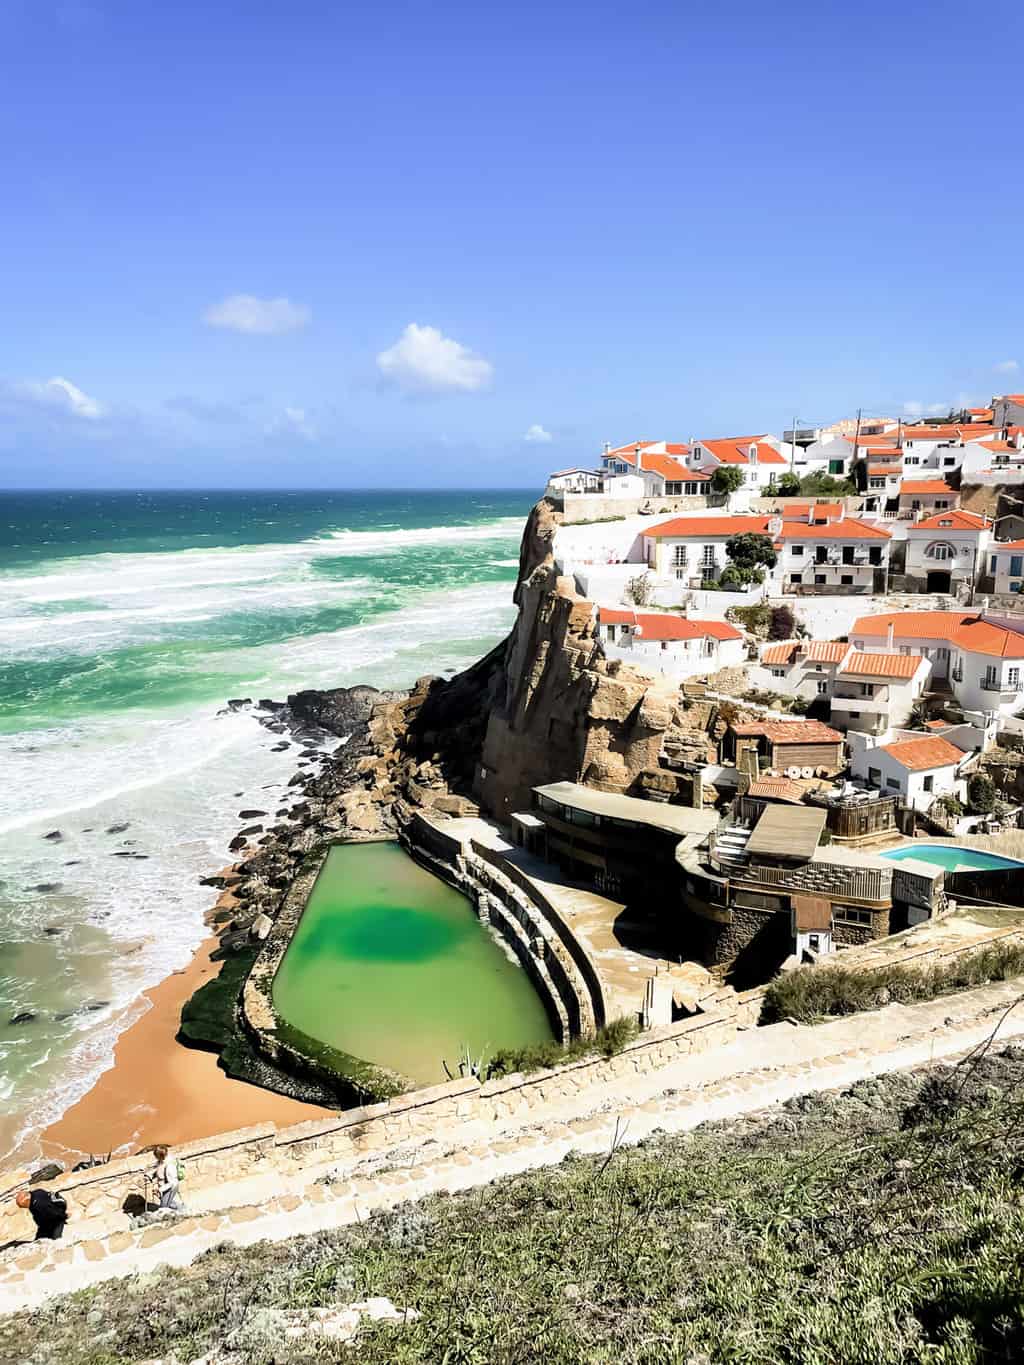 A small village with white houses and red roofs overlook the sea and a man made ocean pool in Azenhas do Mar Portugal. 